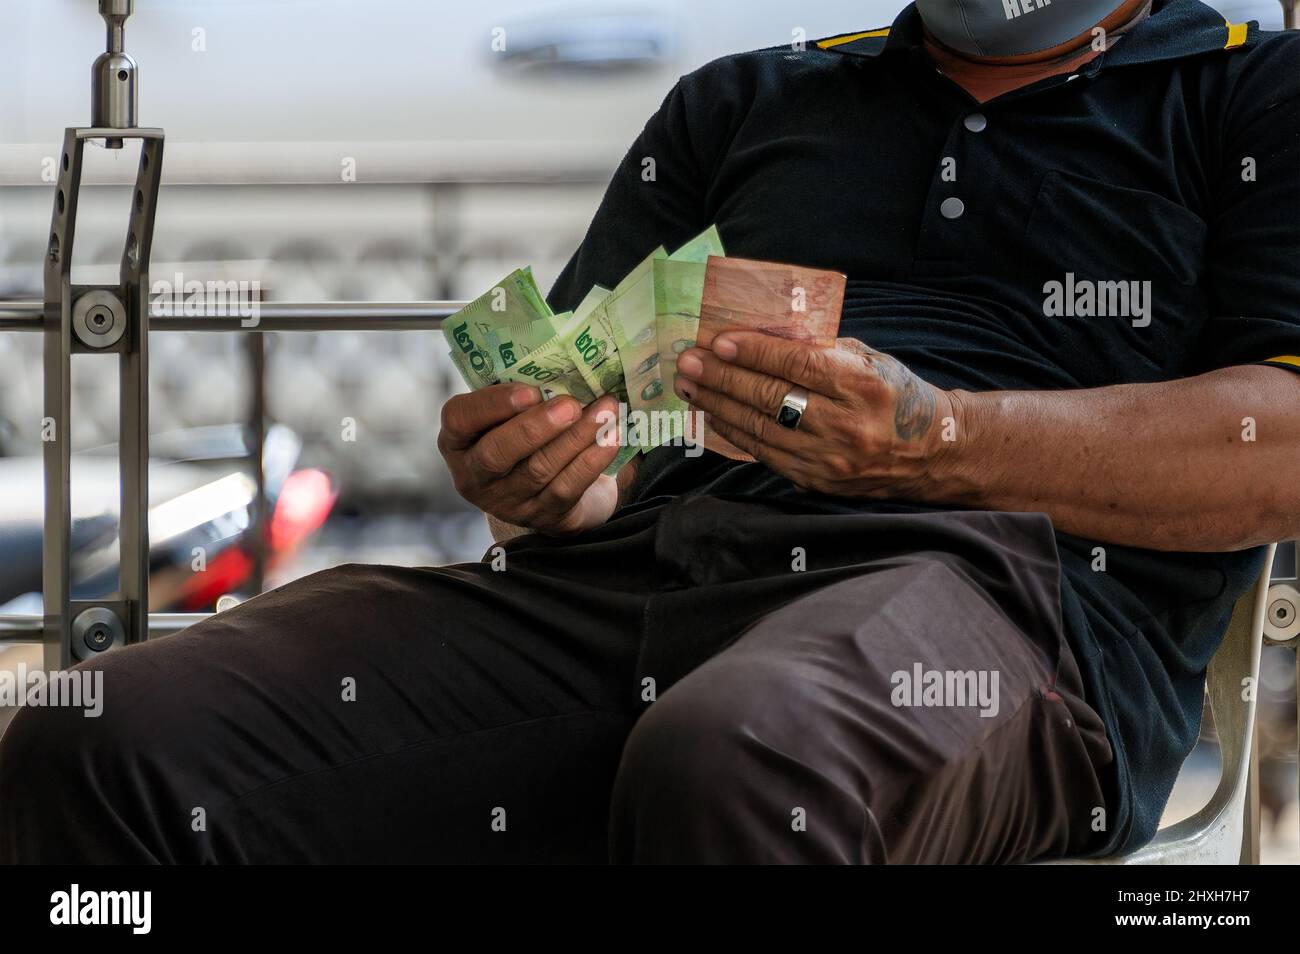 A man checks his money. They are Thai bank notes in one-hundred-baht bill, and twenty-baht bills. Stock Photo